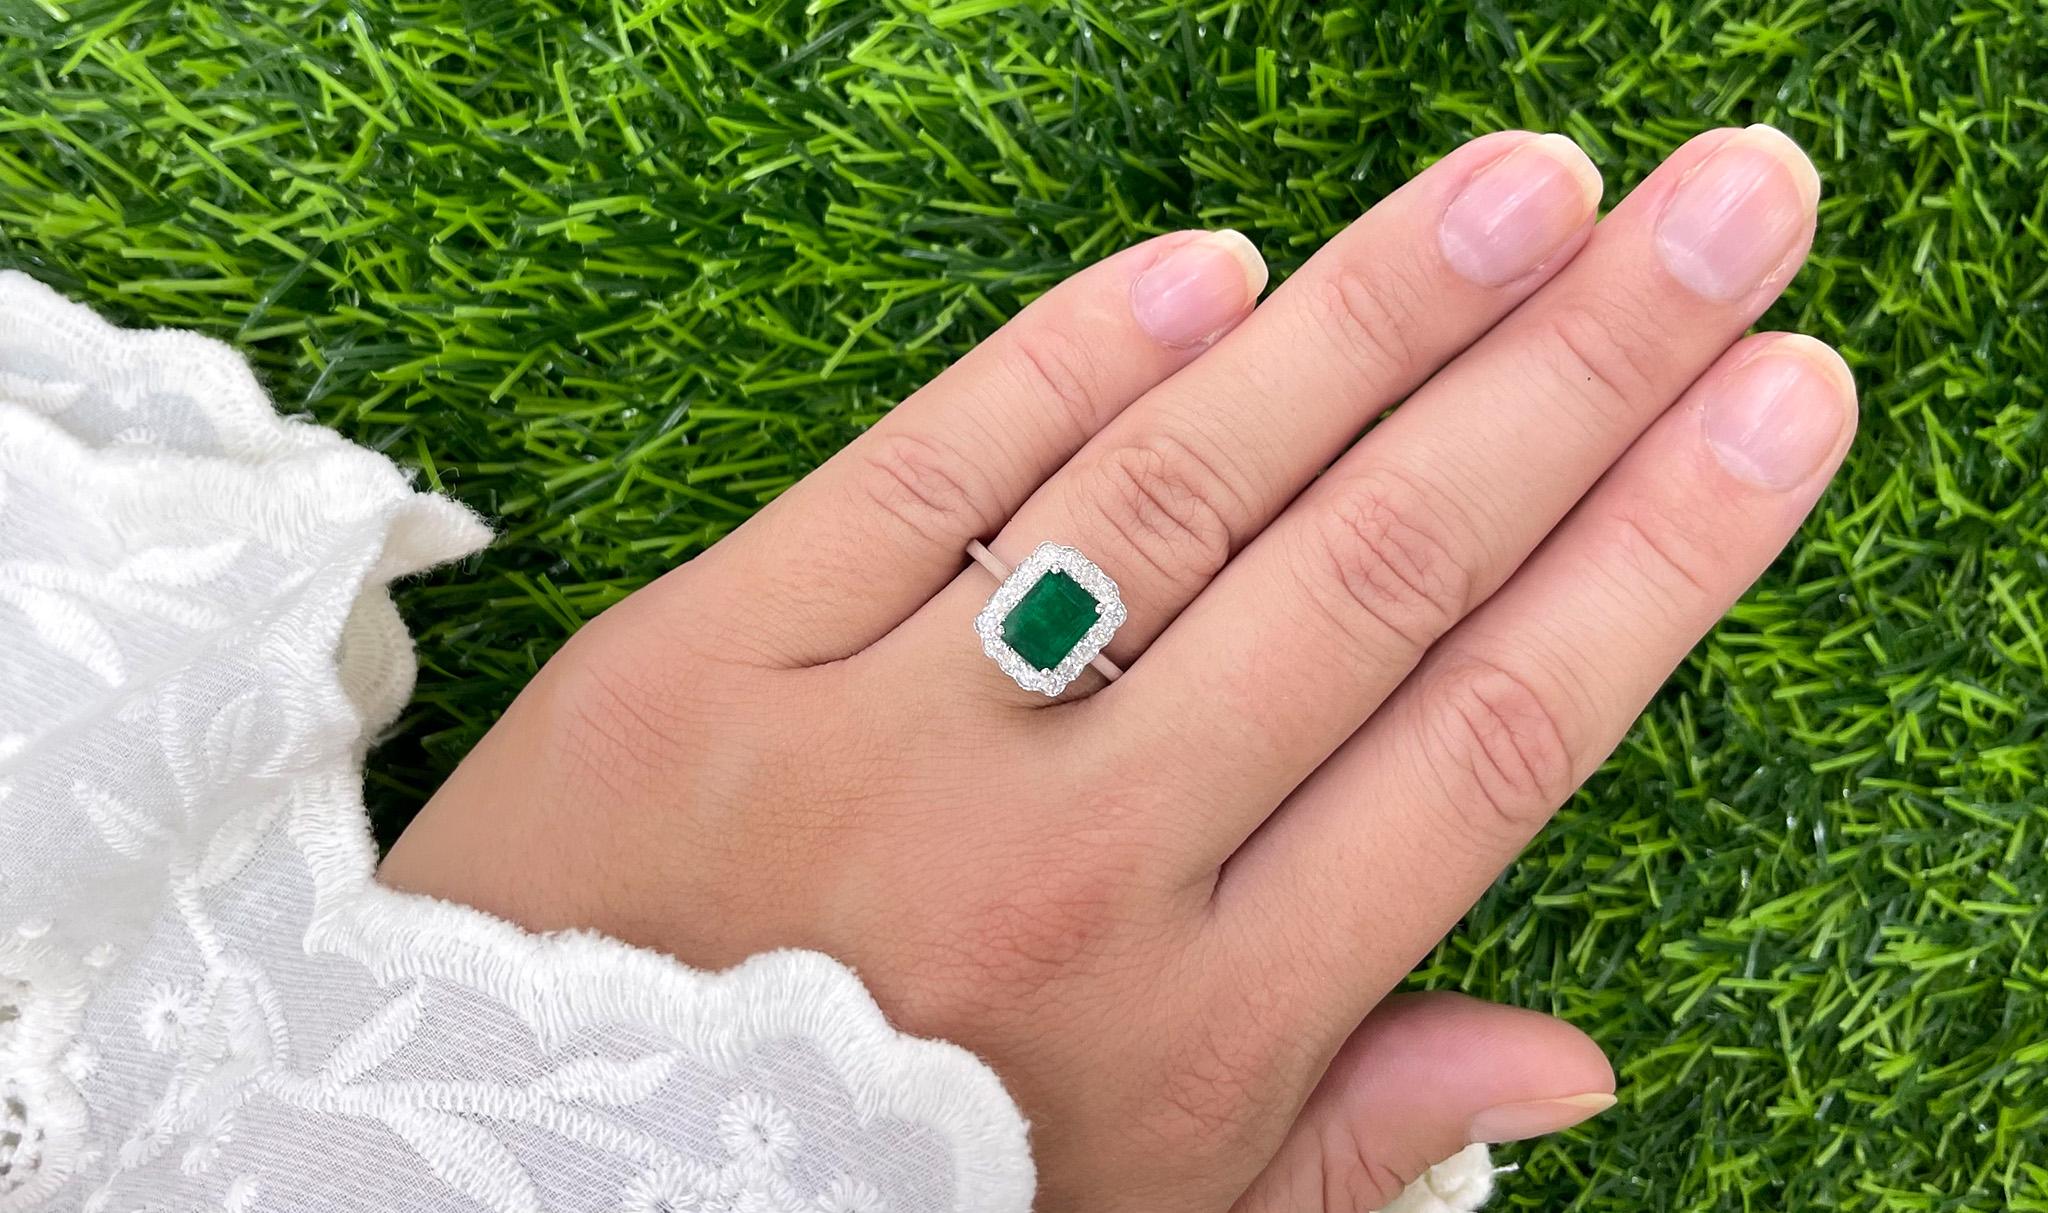 Art Deco Emerald Ring Set With Diamonds. It comes with an appraisal by GIA G.G.
Emerald = 1.68 Carat
Diamonds = 0.42 Carats
Diamonds Color is G
Diamonds Clarity is VS
Metal is 18K White Gold
Ring Size = 6.5 US
It can be resized complimentary 